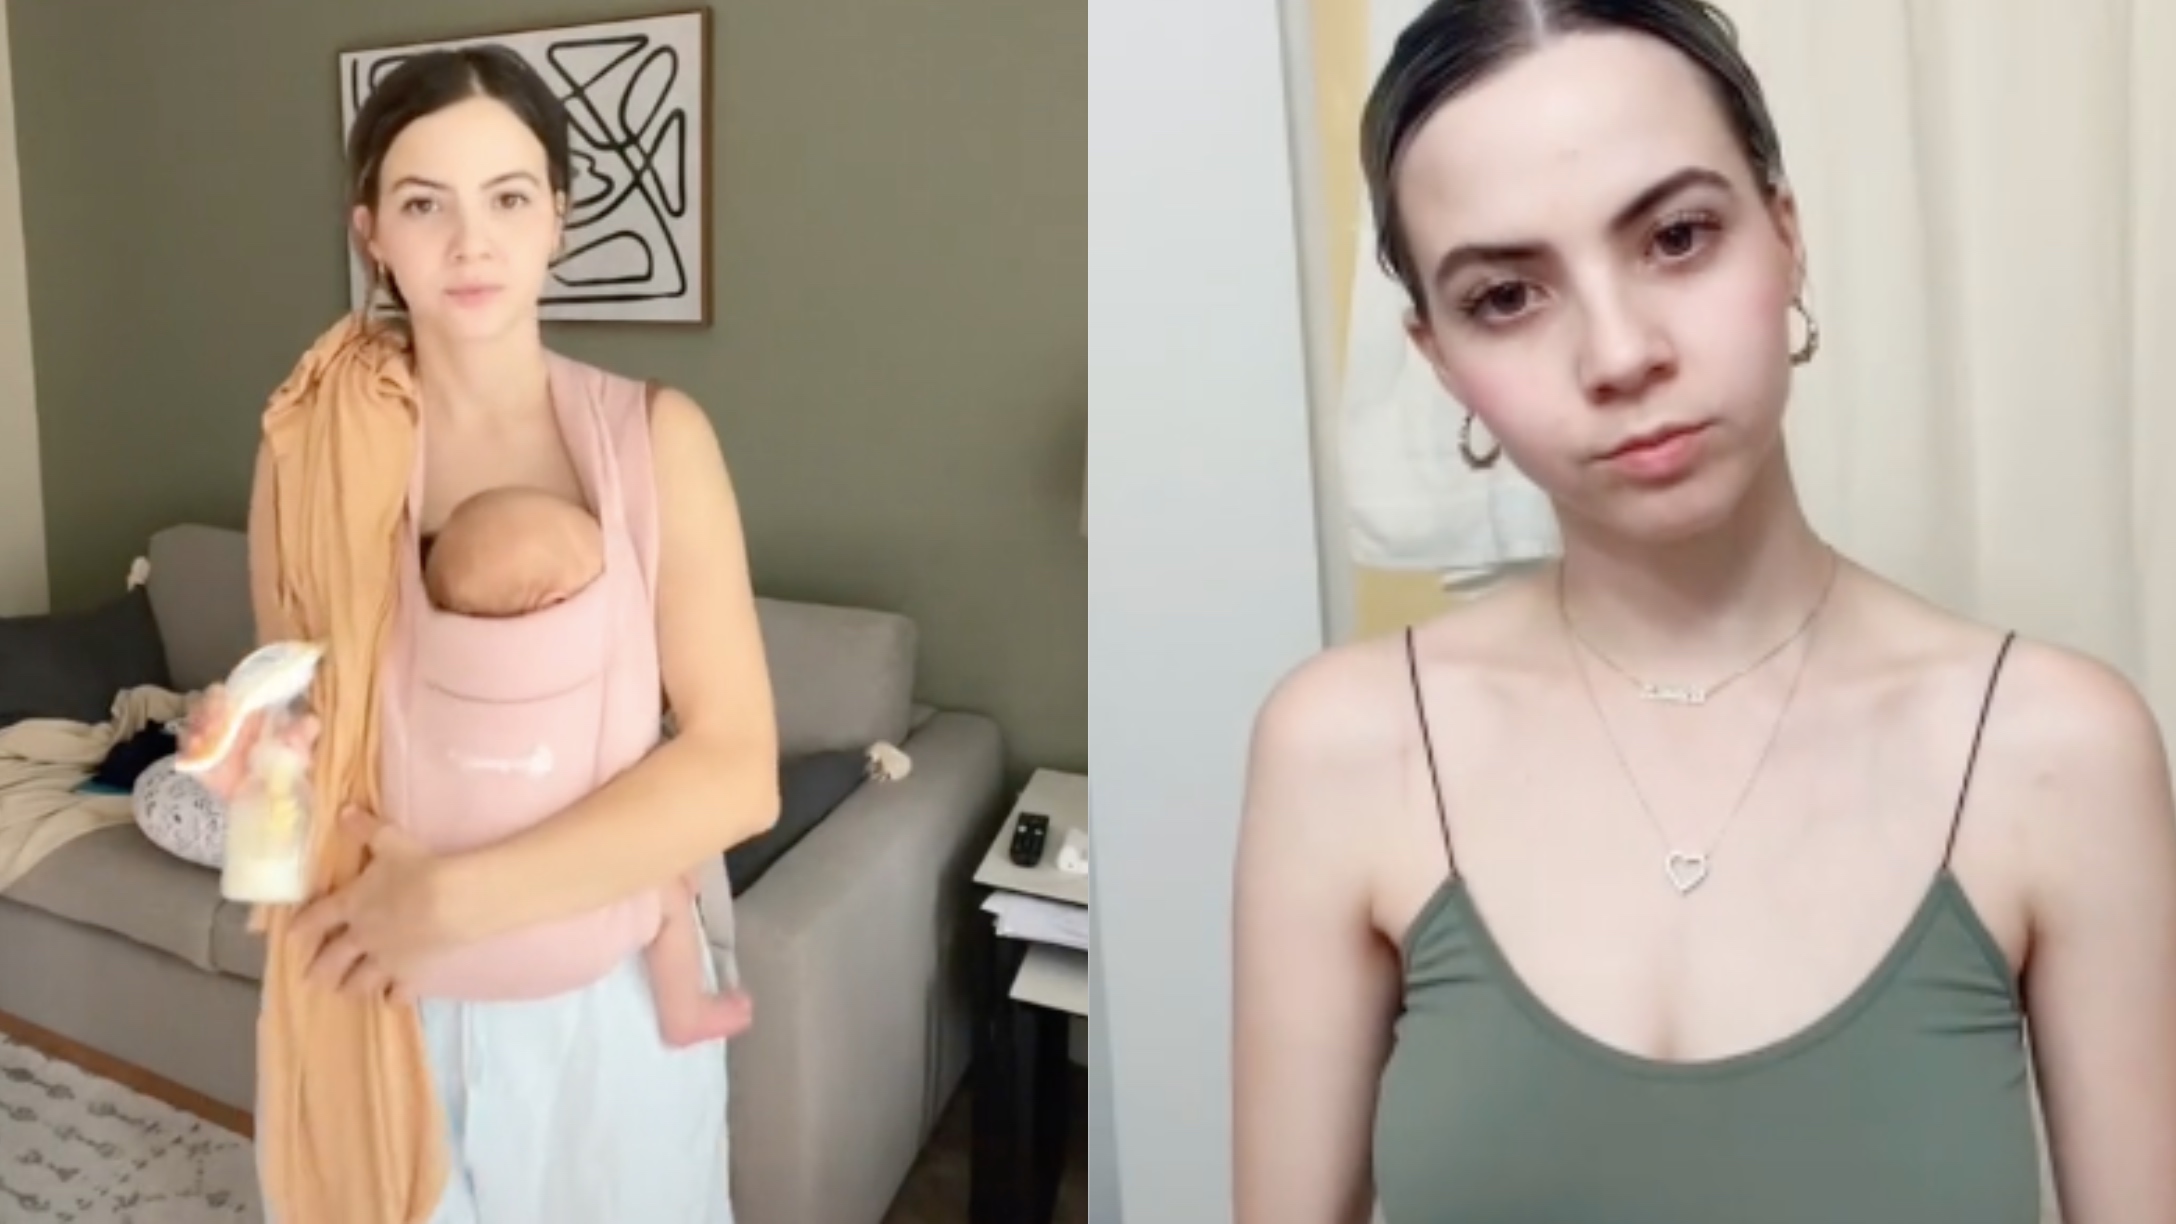 Breastfeeding Mom Jokes About Benefits of Lopsided Breasts & It